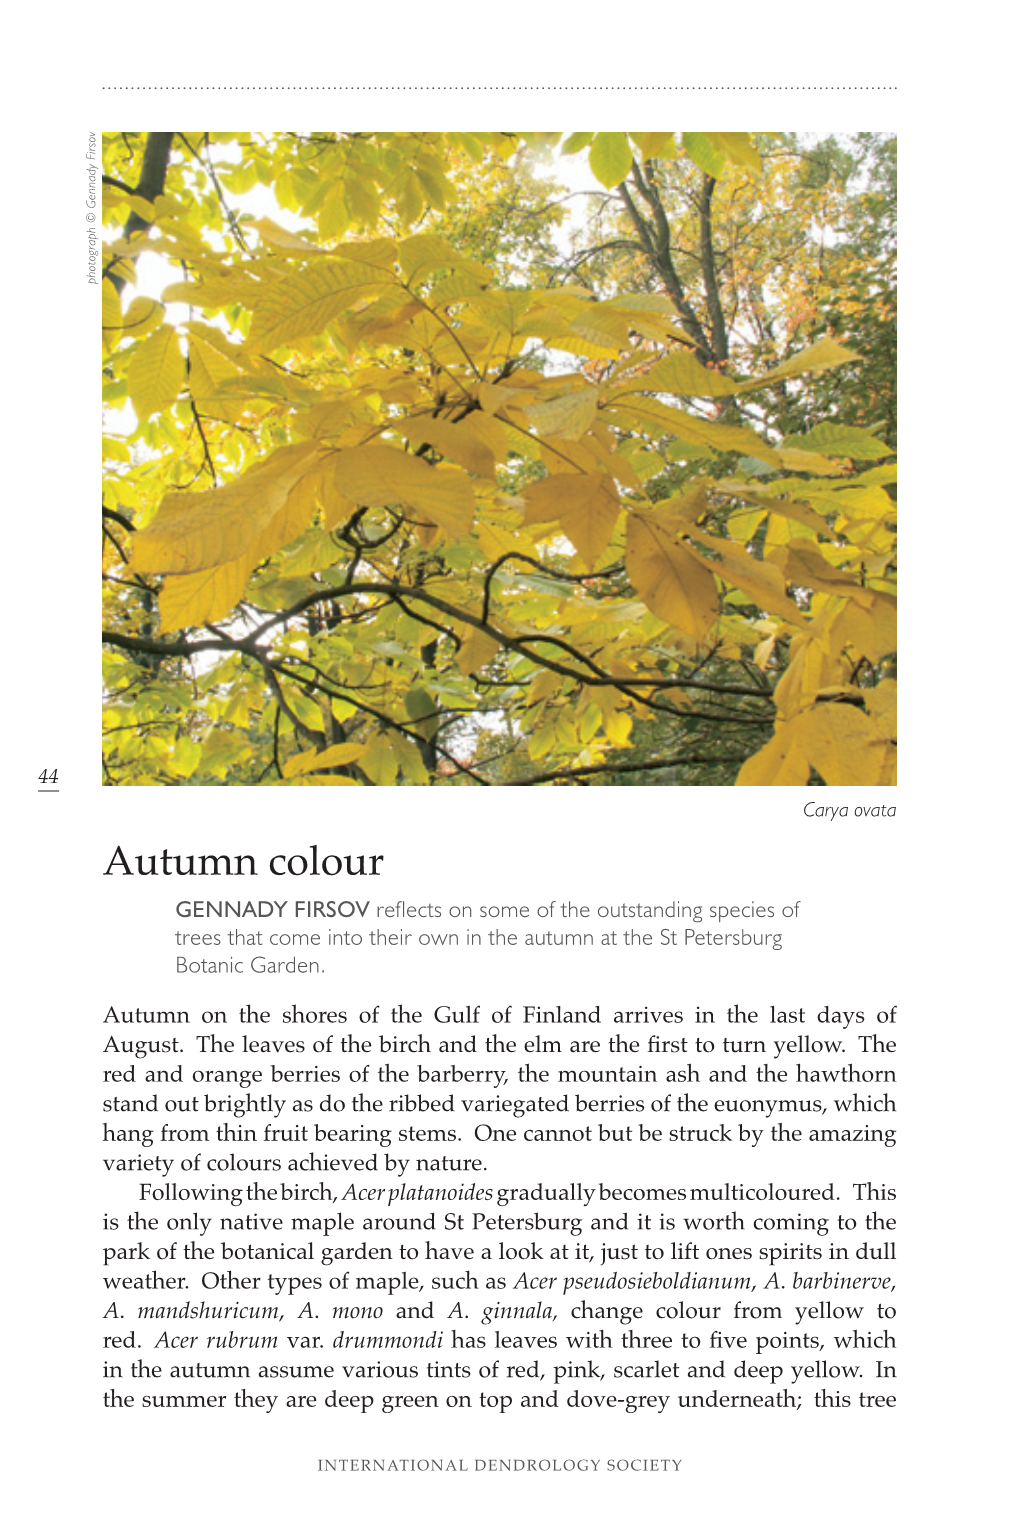 Autumn Colour GENNADY FIRSOV Reflects on Some of the Outstanding Species of Trees That Come Into Their Own in the Autumn at the St Petersburg Botanic Garden